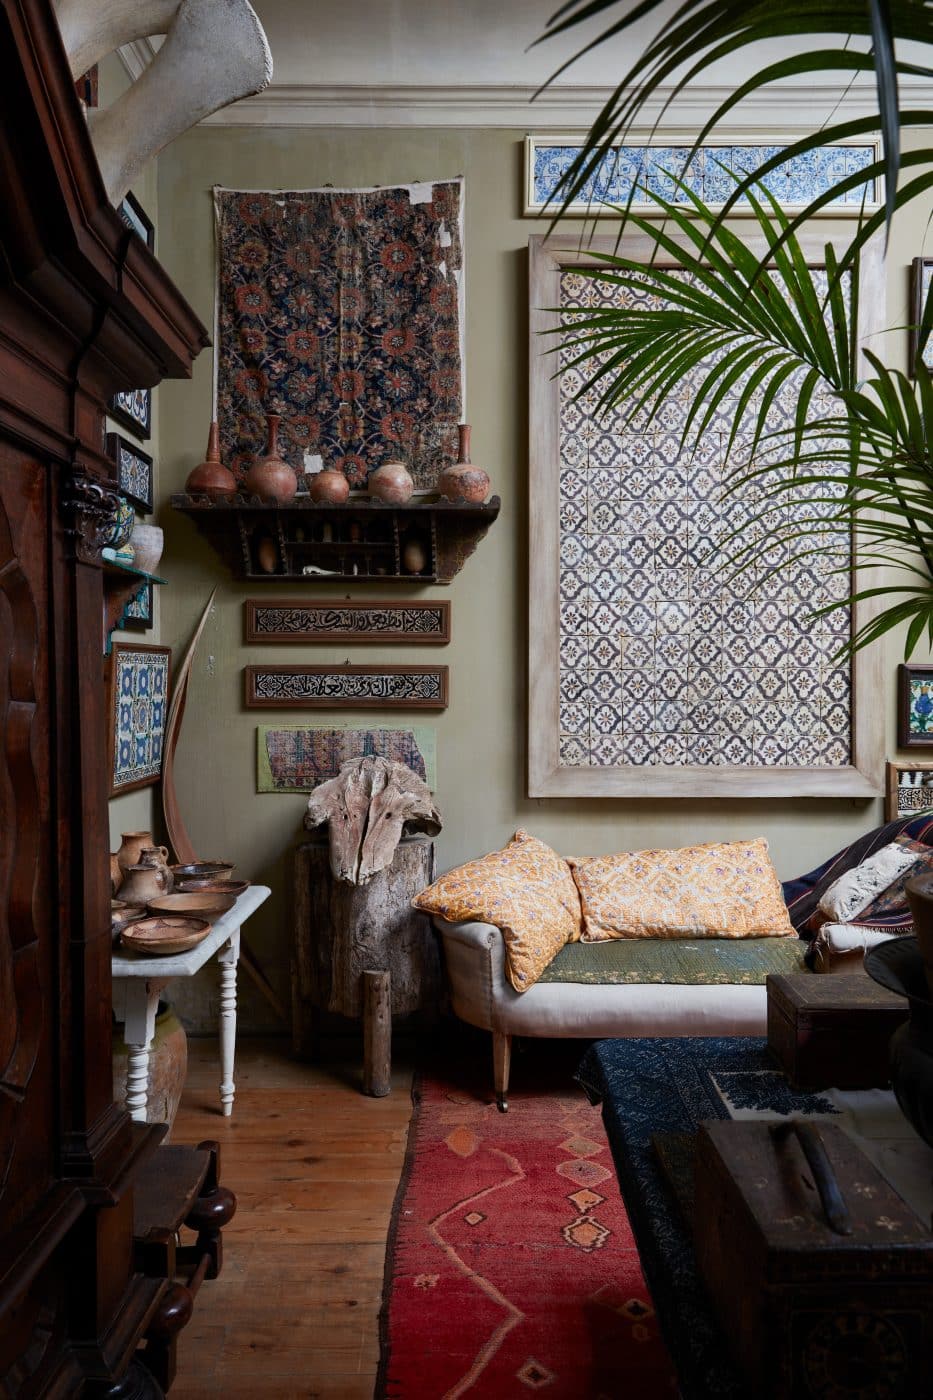 Sitting corner at home of Umberto Pasti and Stephan Janson as featured in the Rizzoli book The House of a Lifetime: A Collector's Journey in Tangier Morocco 